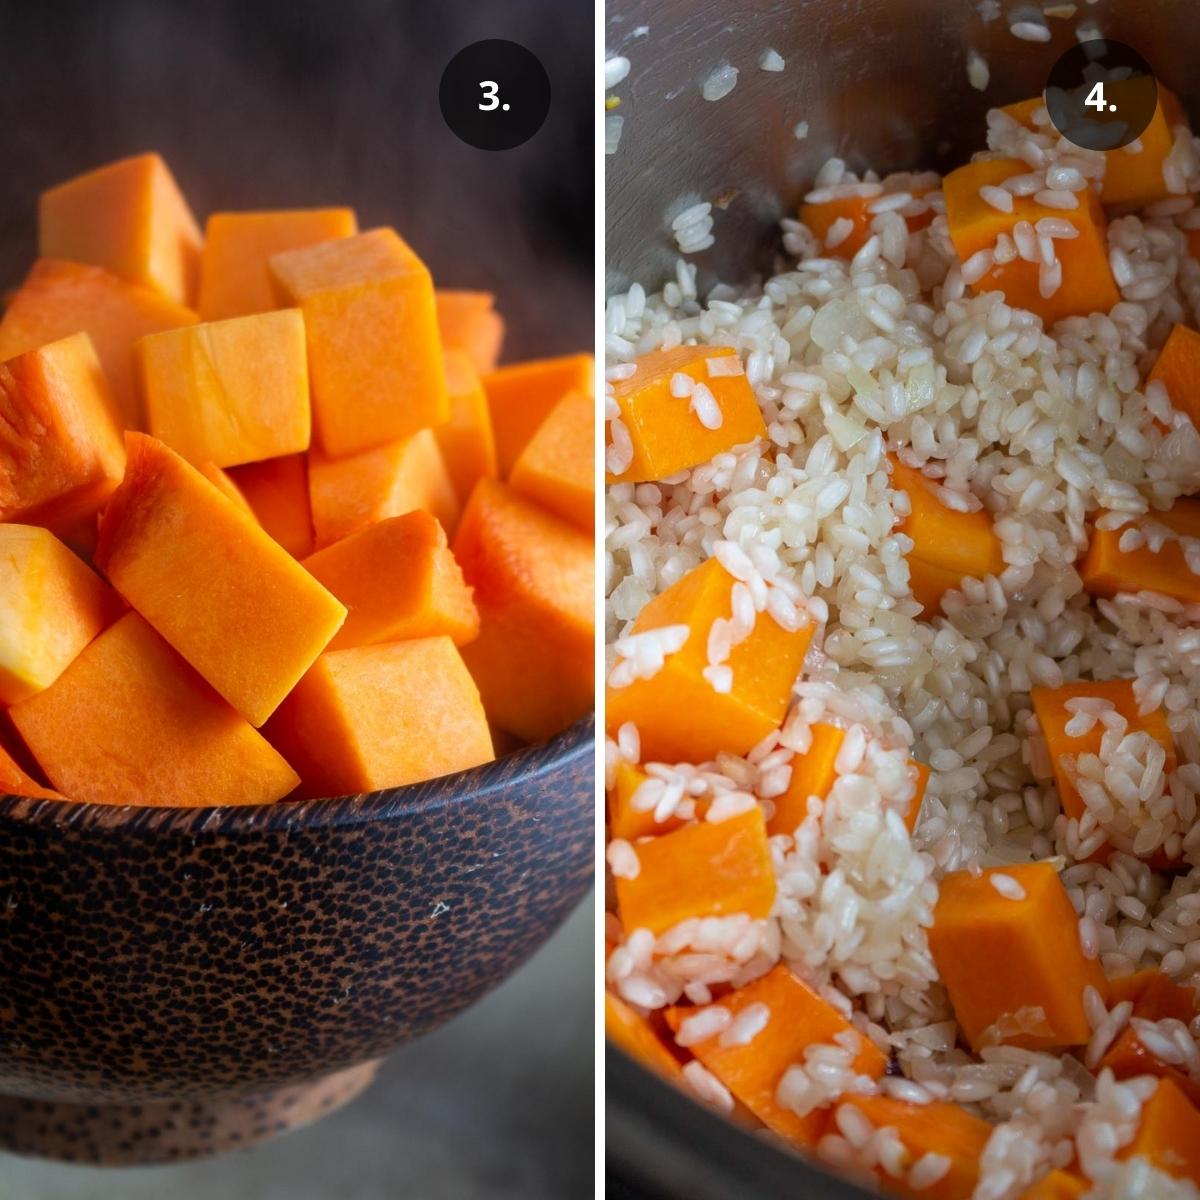 Cubed pumpkin and pumpkin getting mixed in the rice.